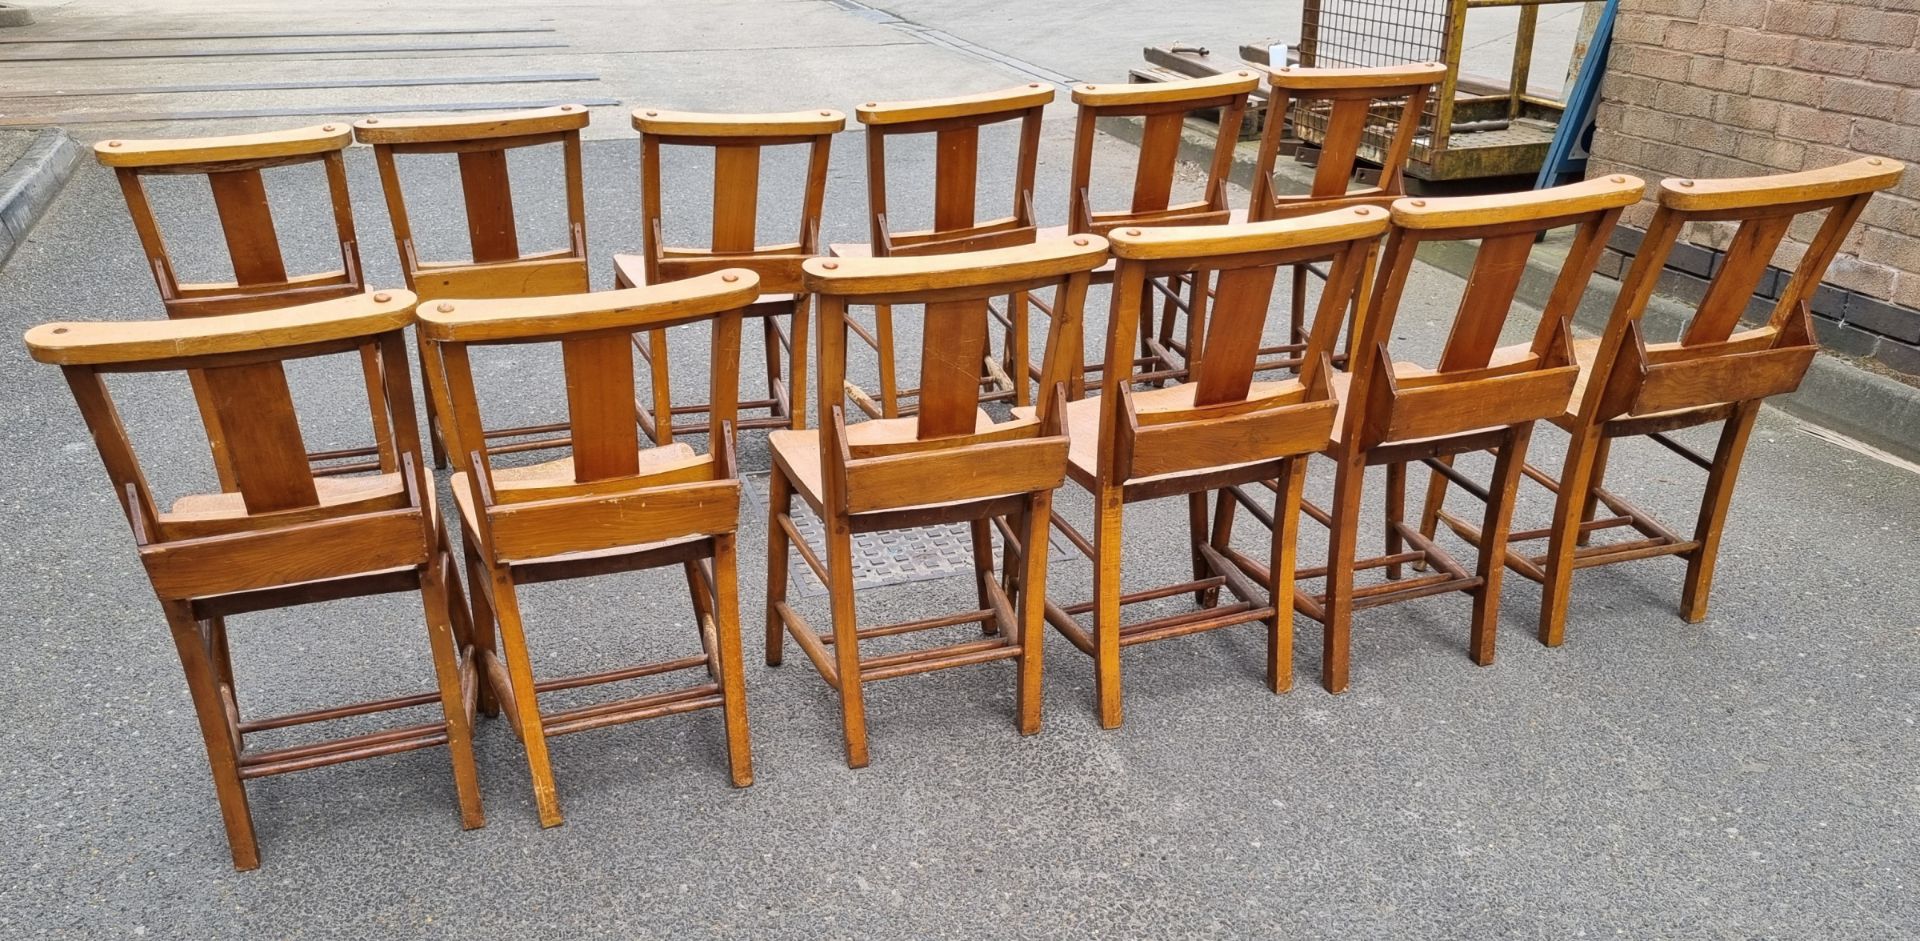 12x Wooden chairs with rear book holder - L 420 x W 420 x H 820mm - Image 3 of 10